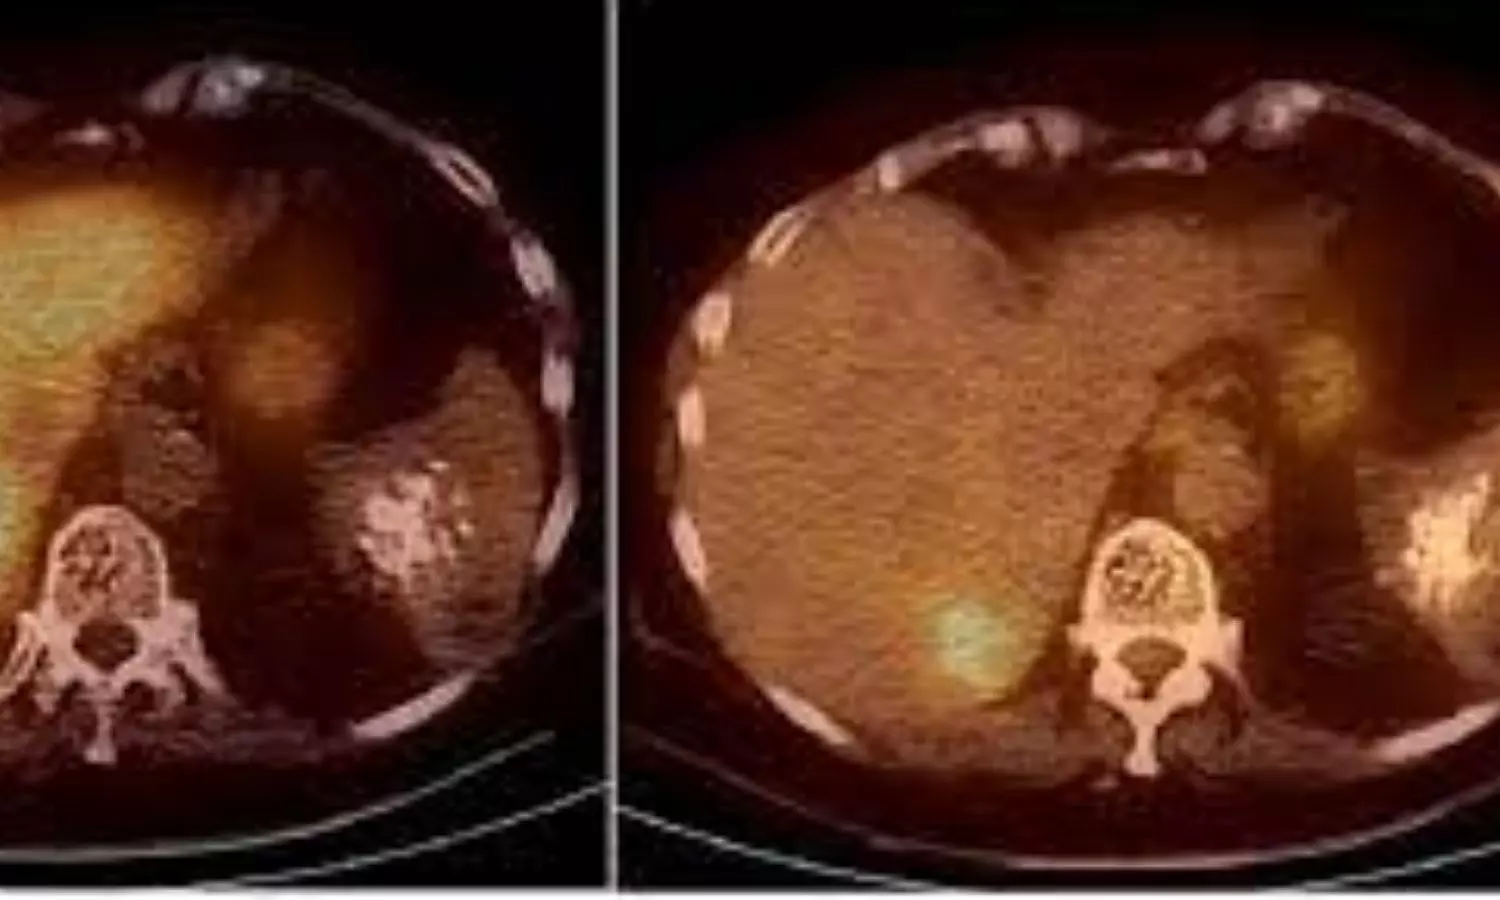 PSMA PET imaging more accurate than CT in detecting hepatocellular carcinoma